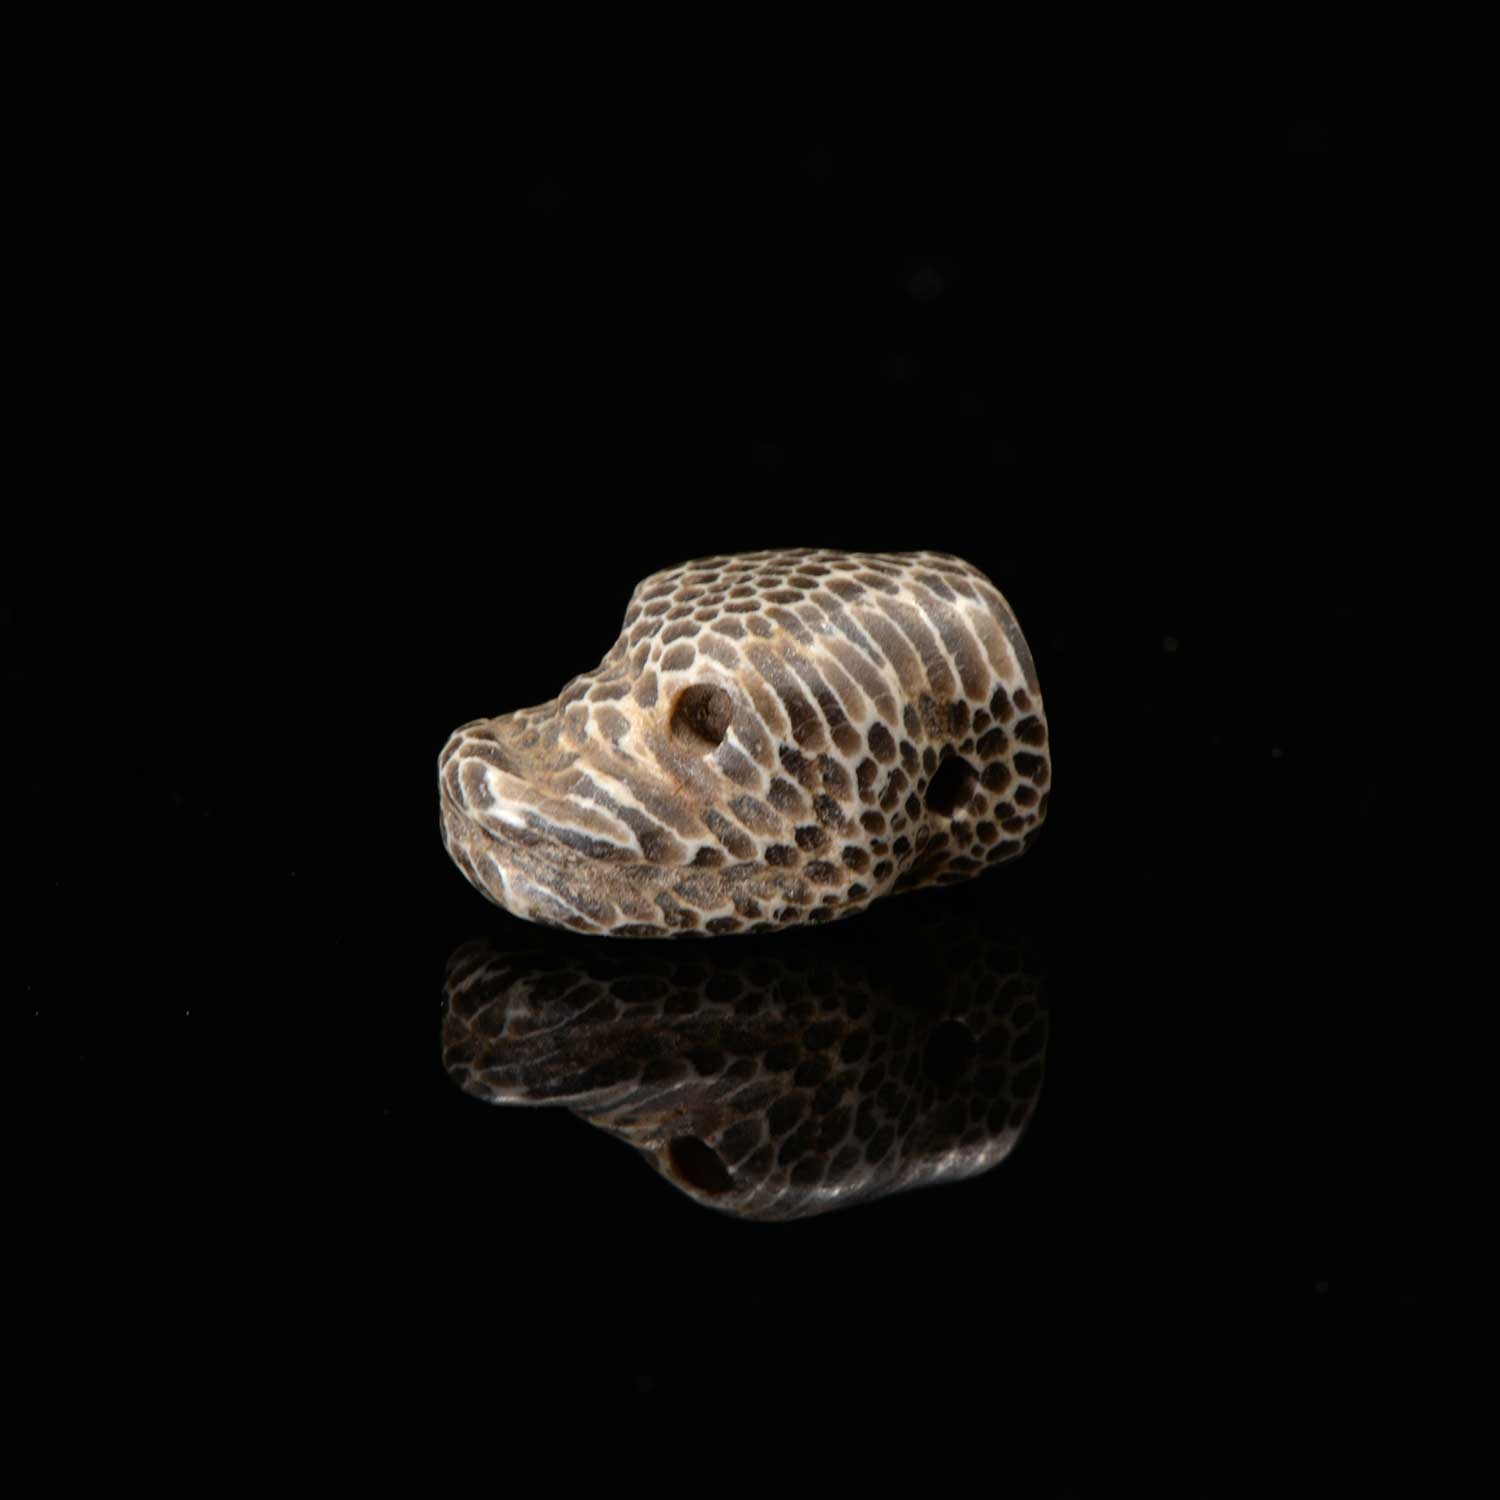 * A superb Near Eastern Snake Head Amulet, Achaemenid Period, ca. 550 - 330 BCE - Sands of Time Ancient Art